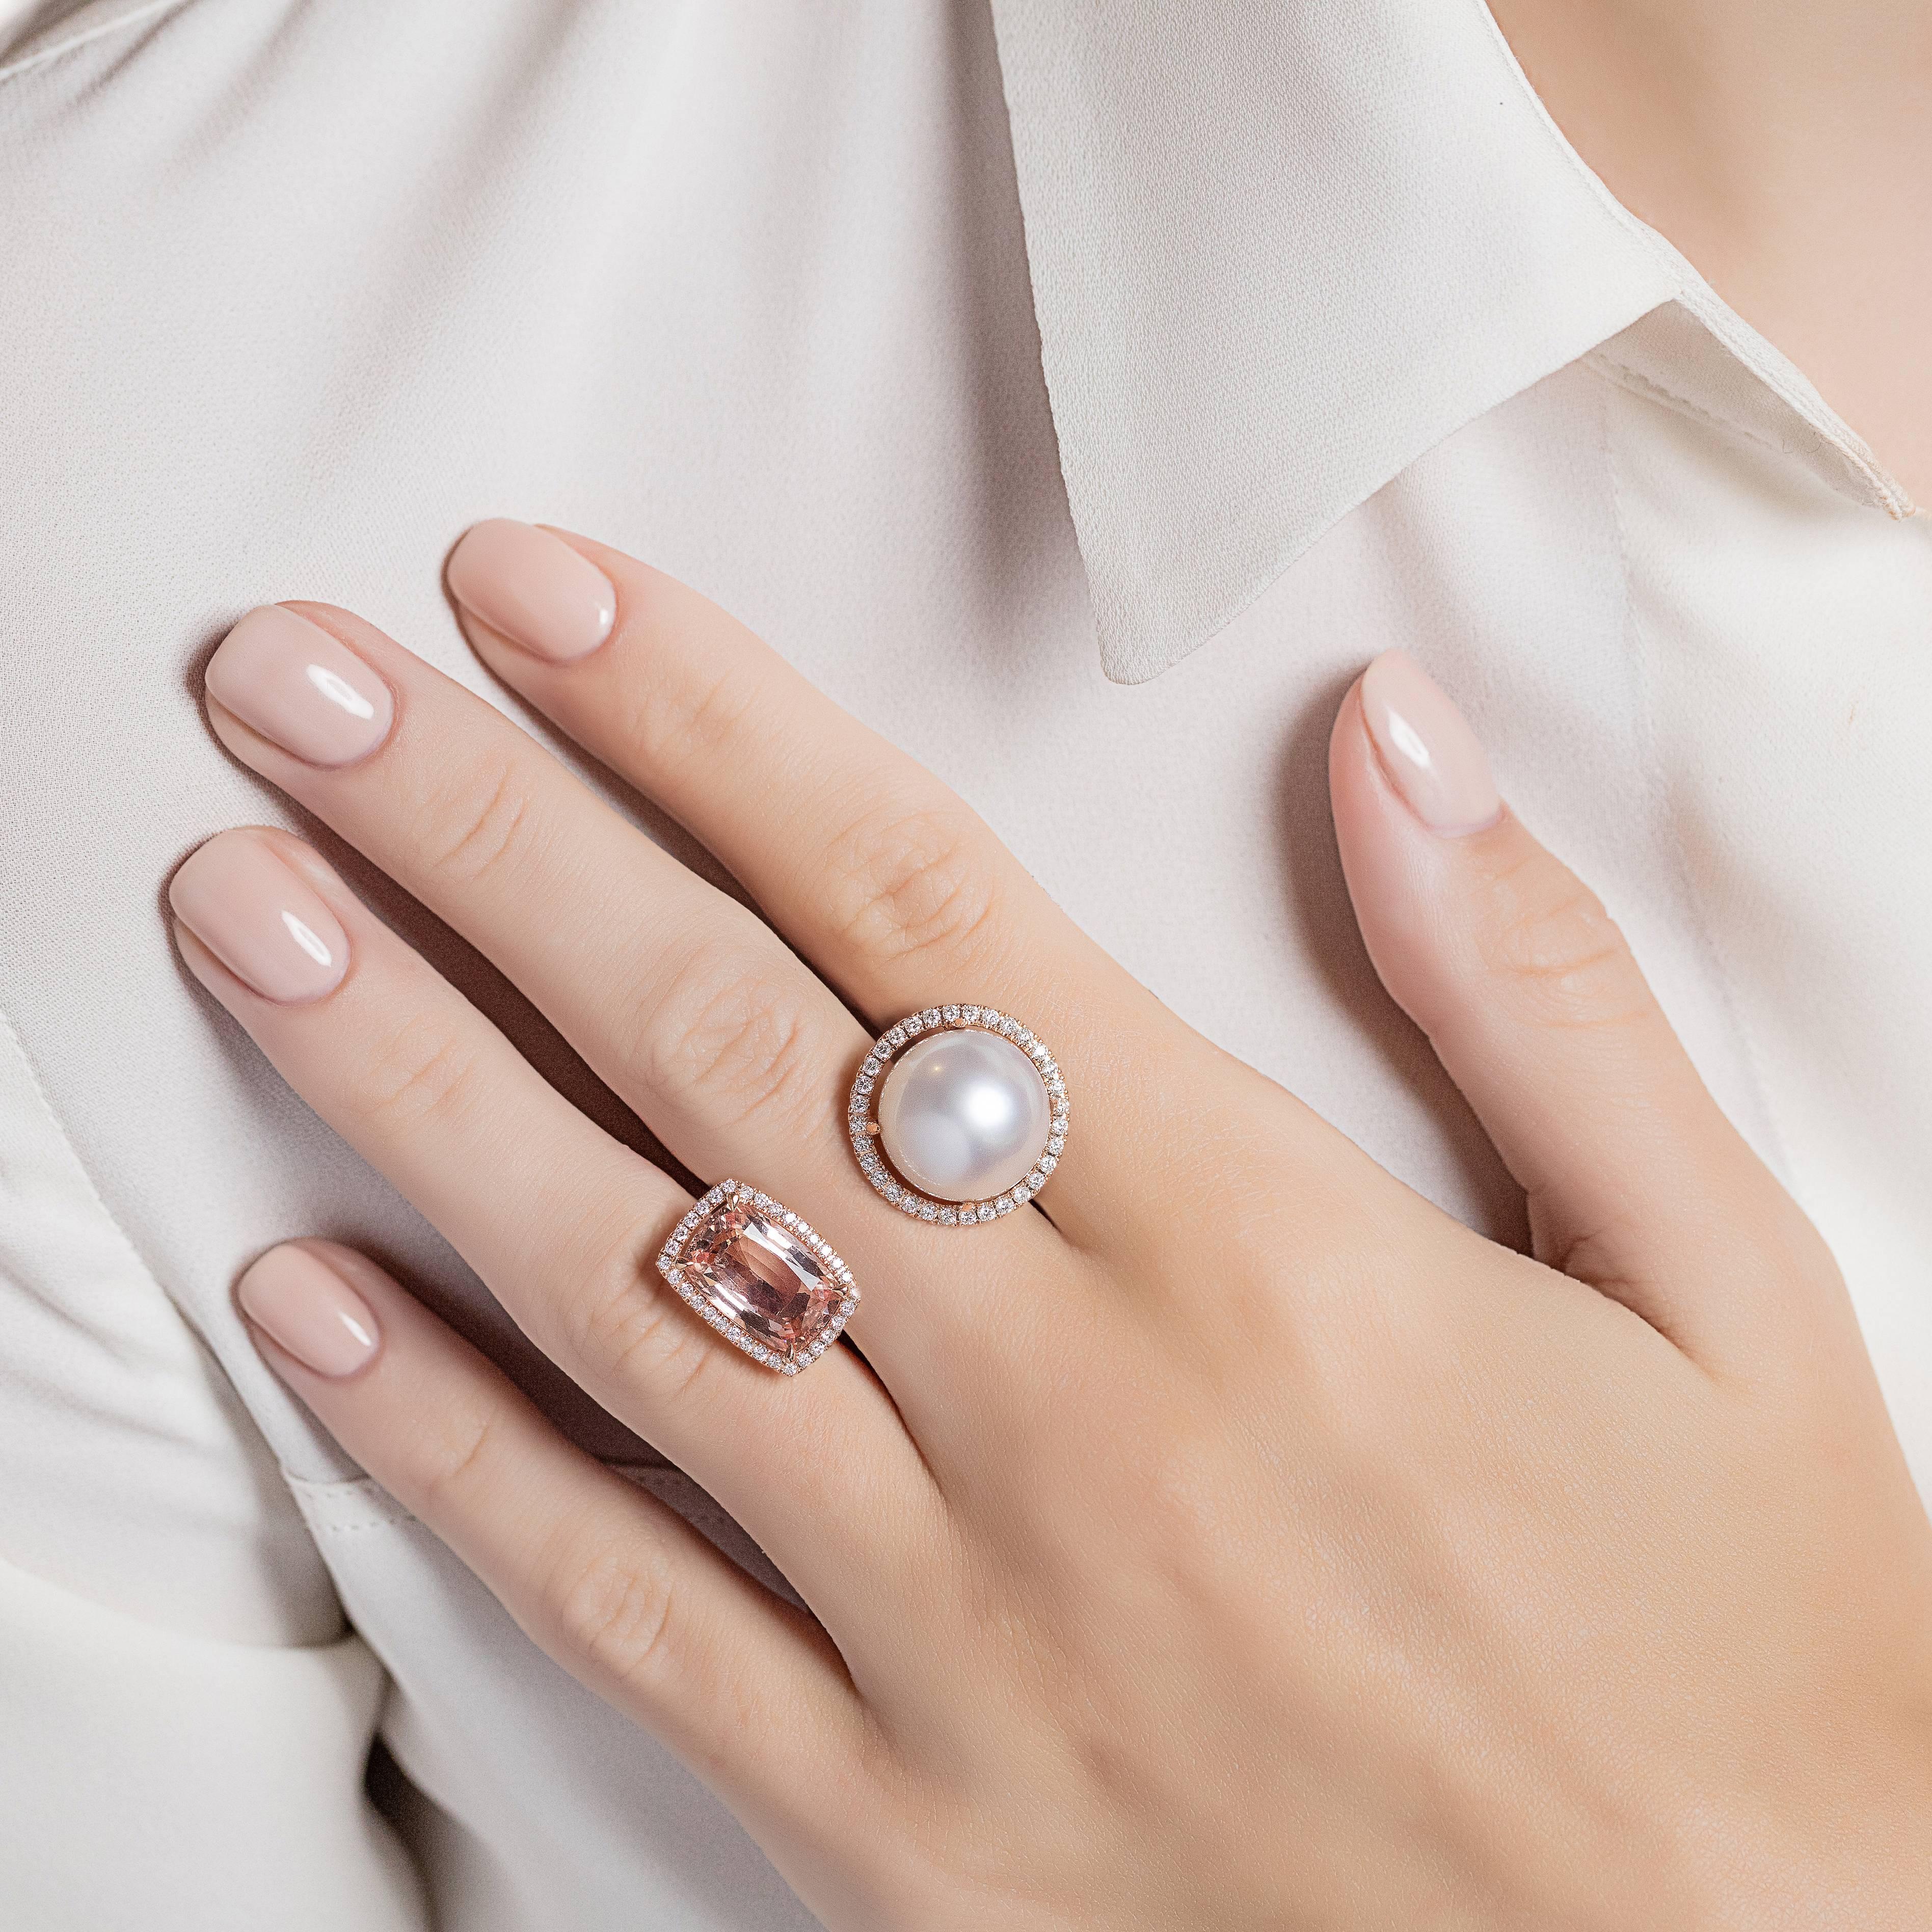 18K rose gold (6.0g), 1 pink morganite 3.50ct., 1 white south sea pearl 13.8mm, 64 white round-cut diamonds 0.54ct. This ring can easily be re-sized to fit.

A striking between the finger ring made from rose gold with pink morganite and a white